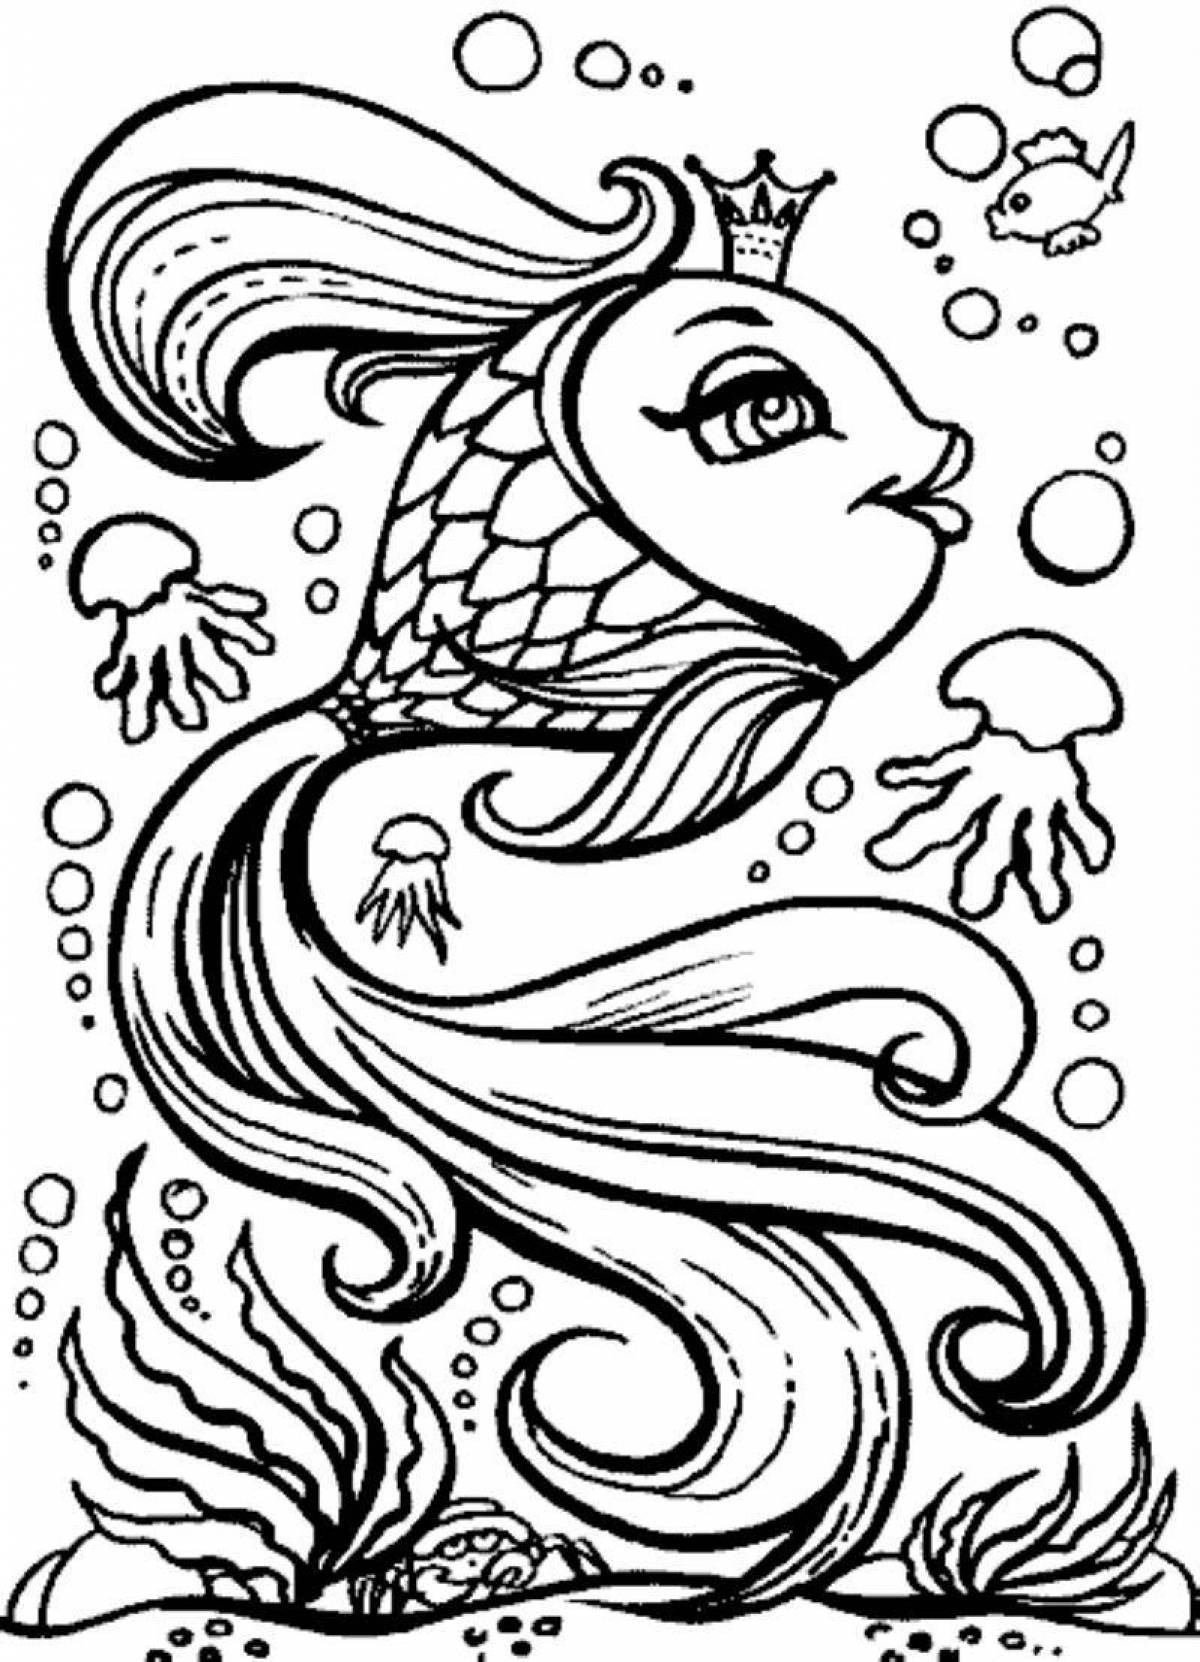 Exciting goldfish coloring book for the little ones